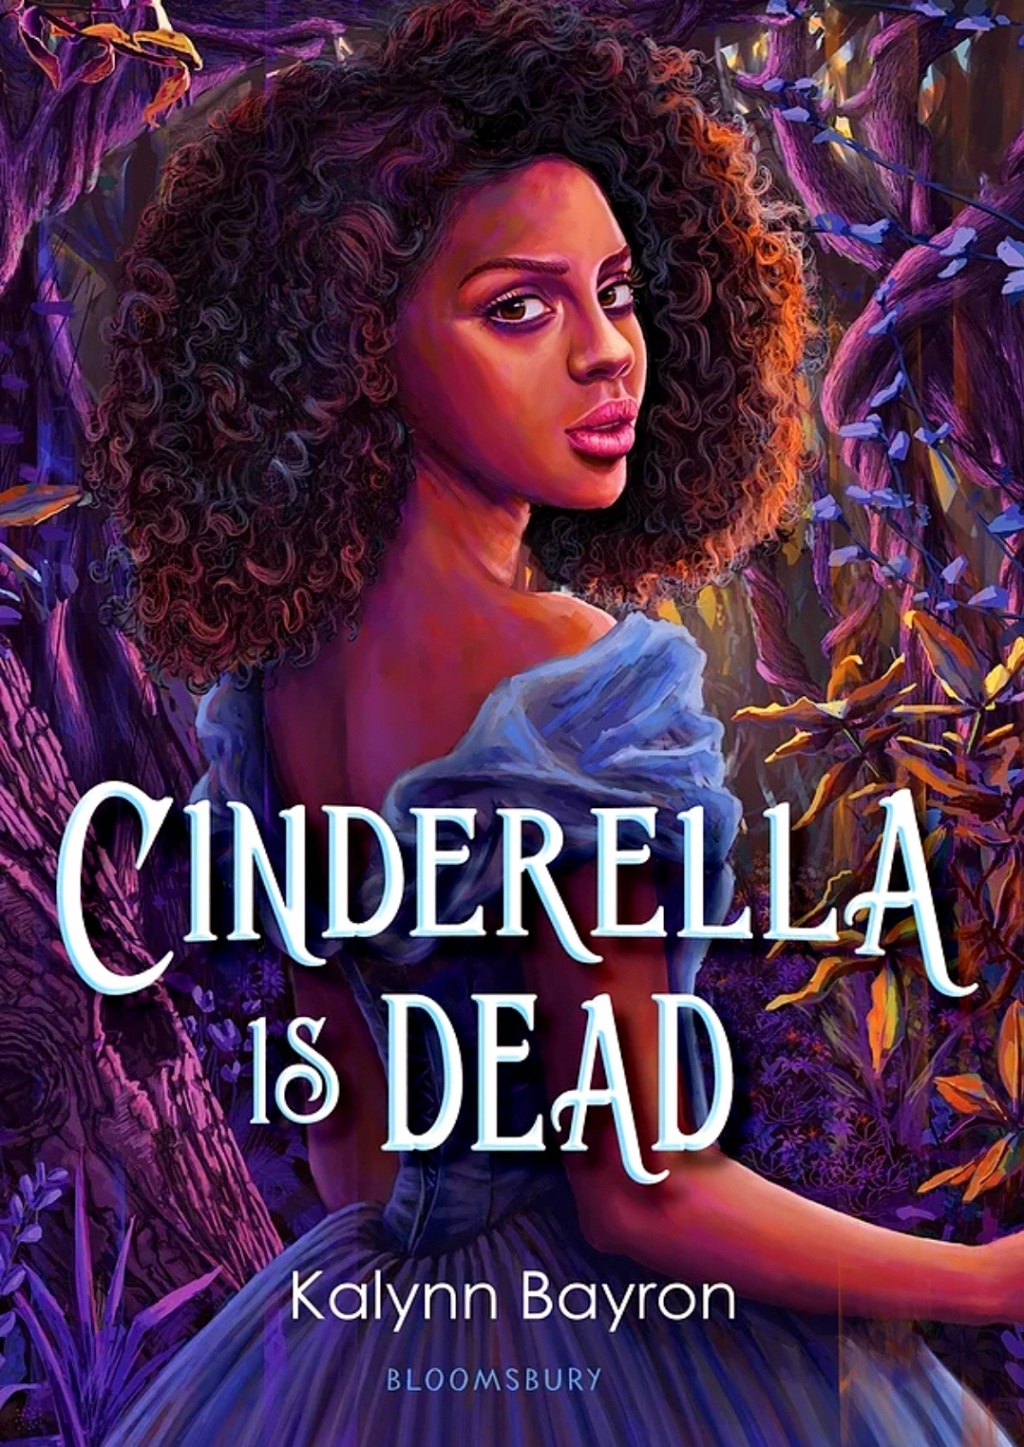 Review: CINDERELLA IS DEAD by KALYNN BAYRON – Narrated by BAHNI TURPIN